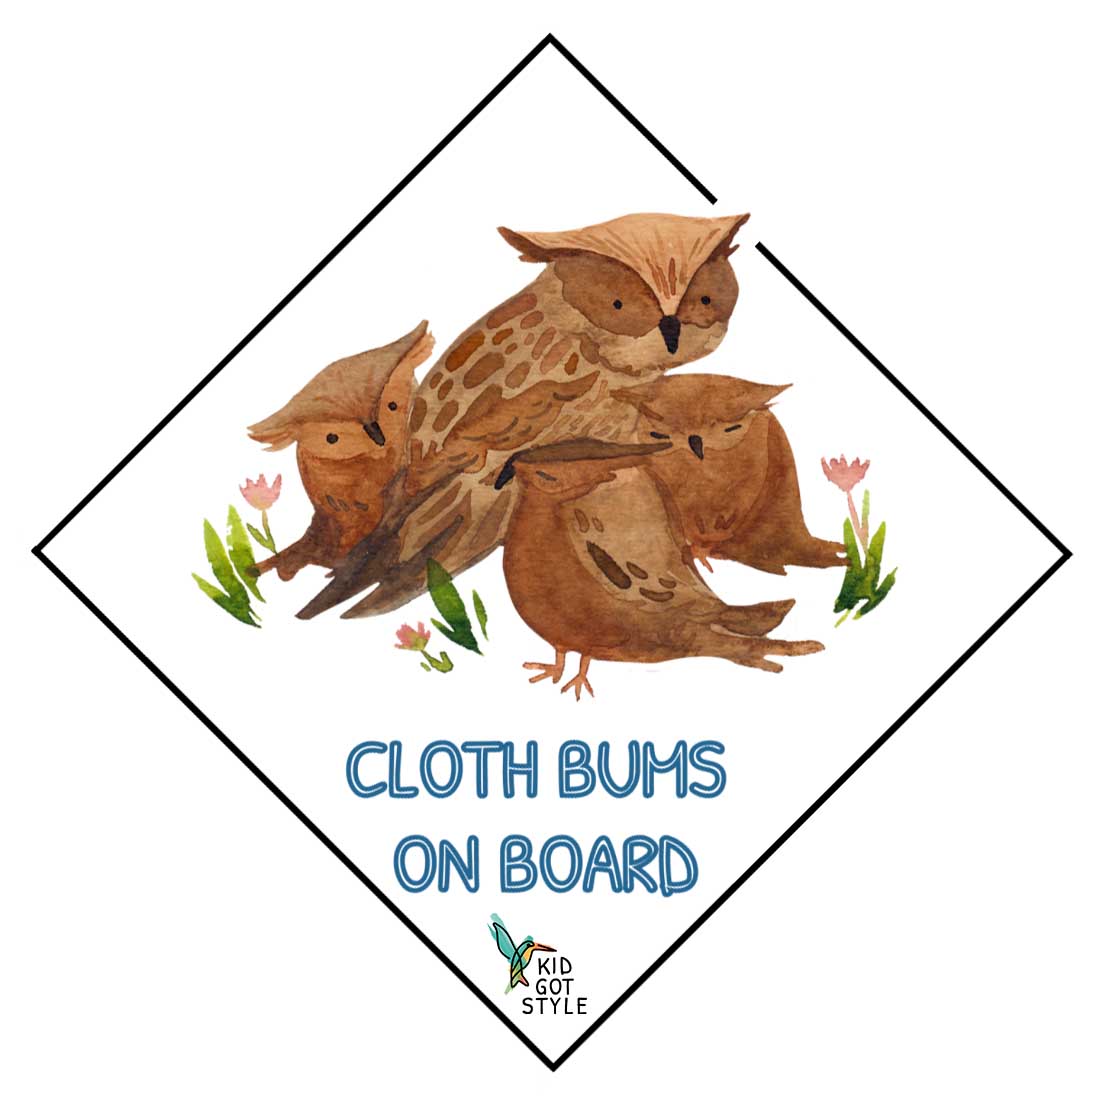 Cloth bums on board sticker with a family of owls